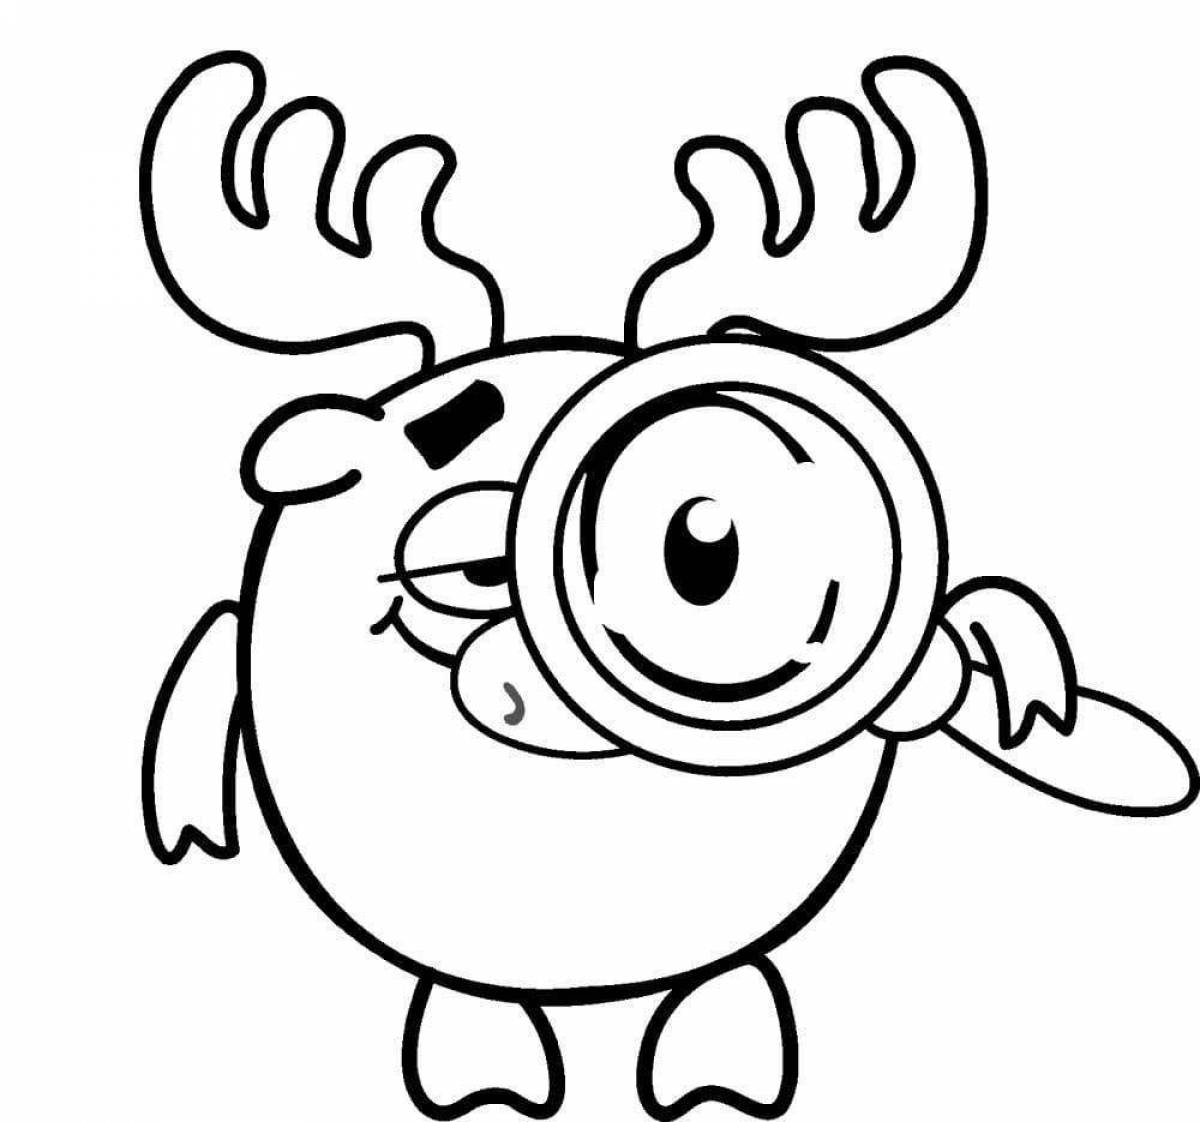 Animated moose coloring page